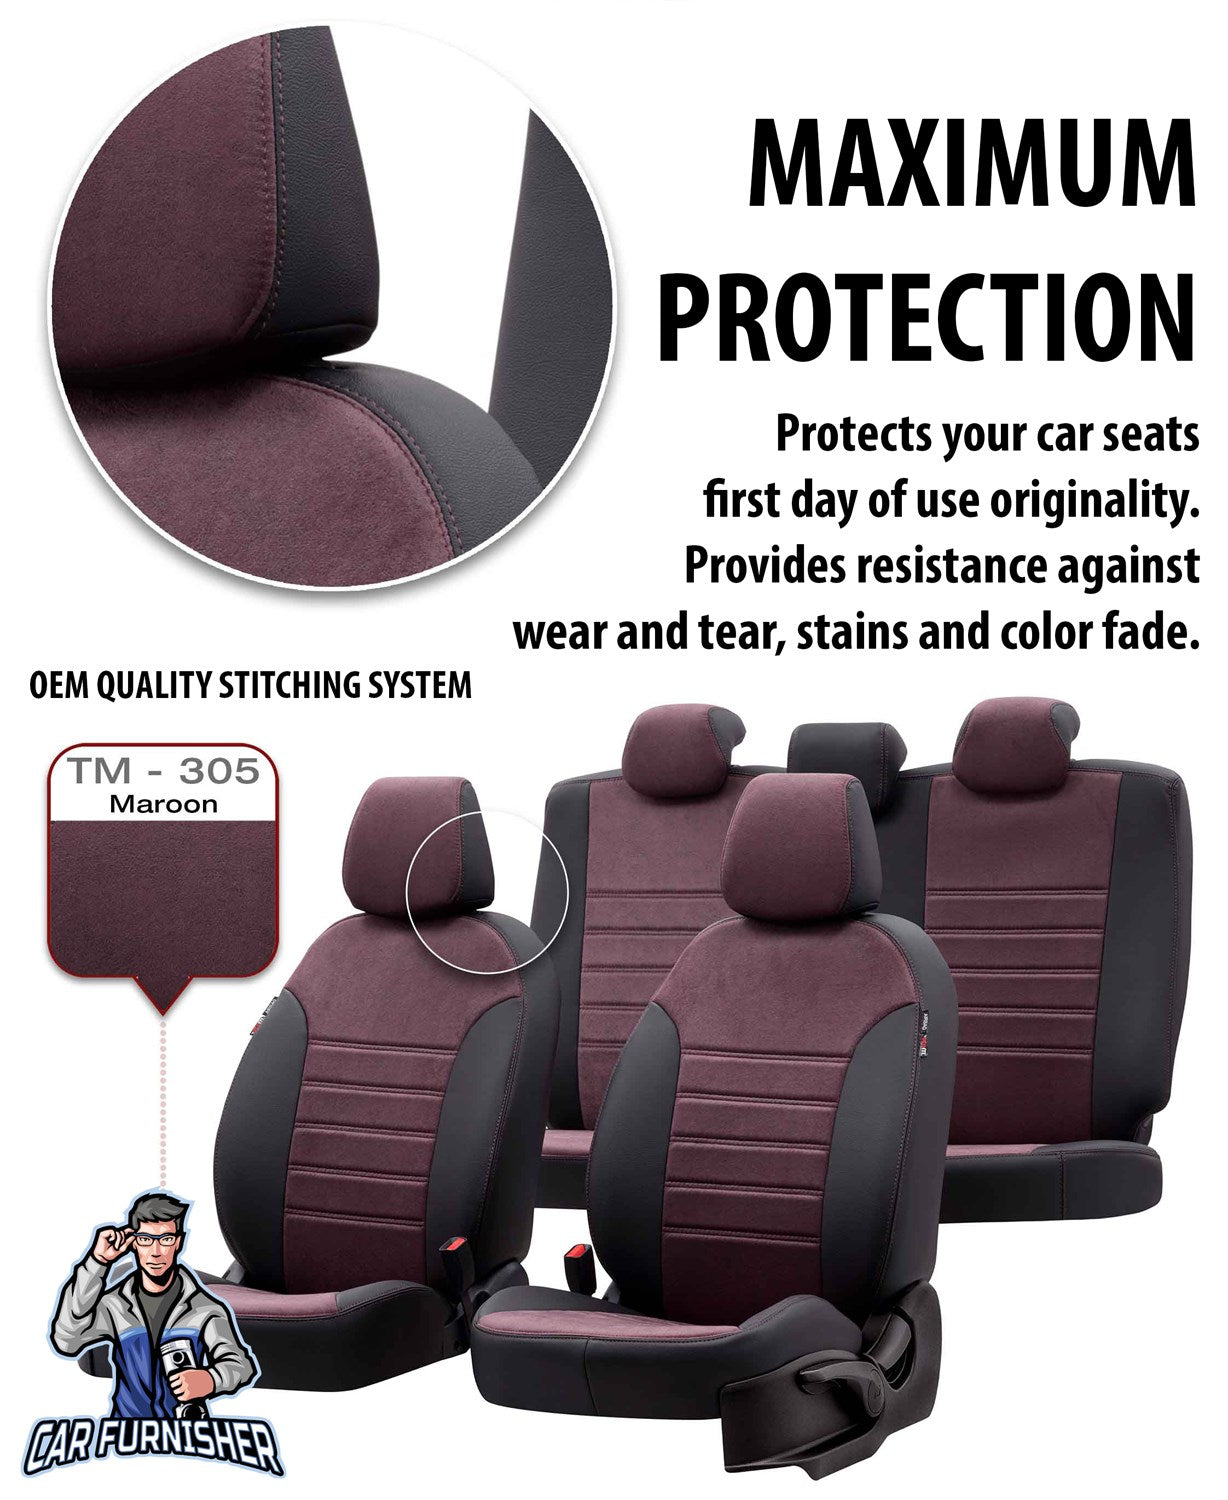 Nissan Skystar Seat Covers Milano Suede Design Burgundy Leather & Suede Fabric